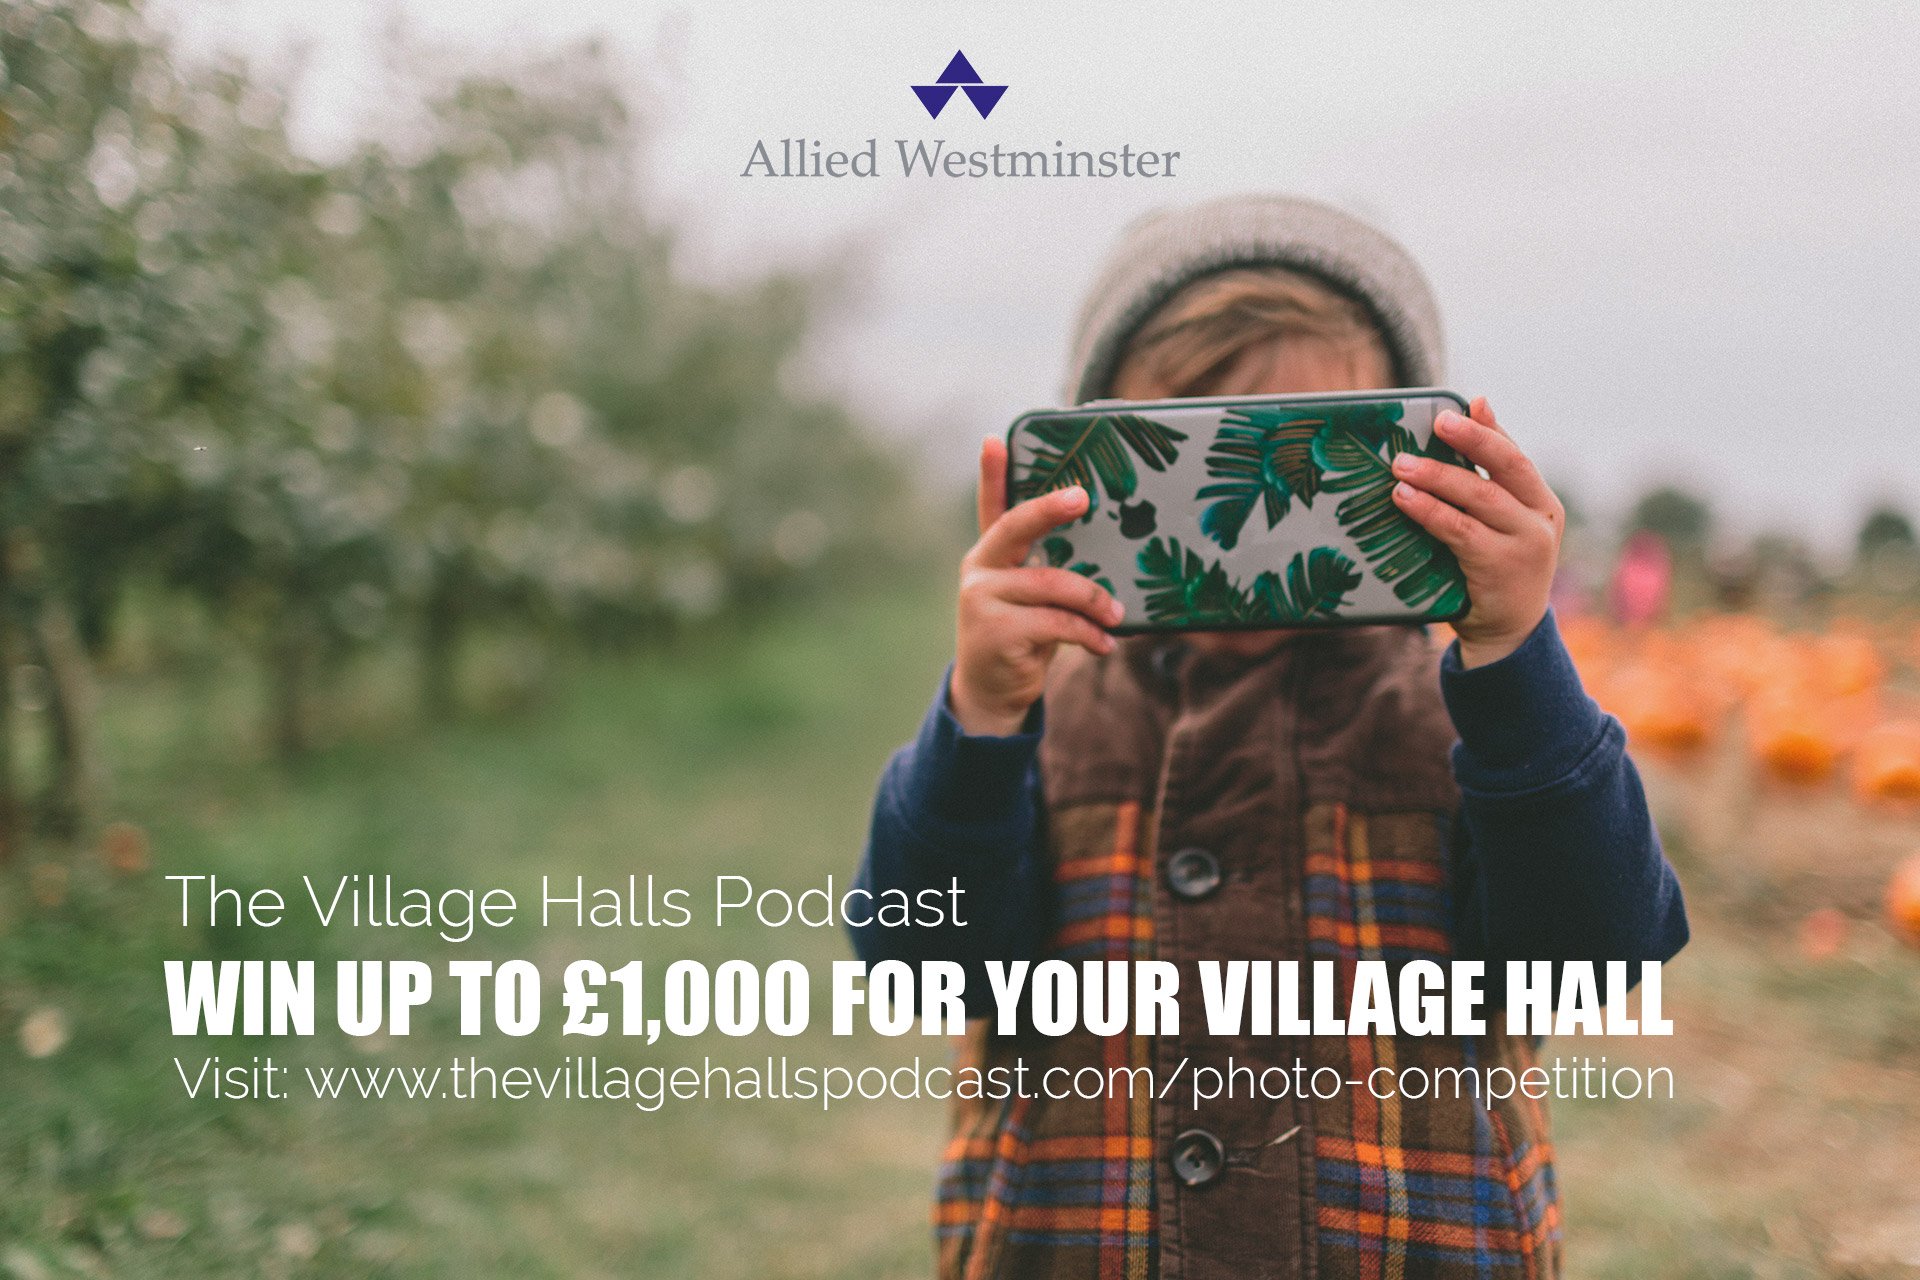 Wonderful Villages Photo Competition 2021 launched...